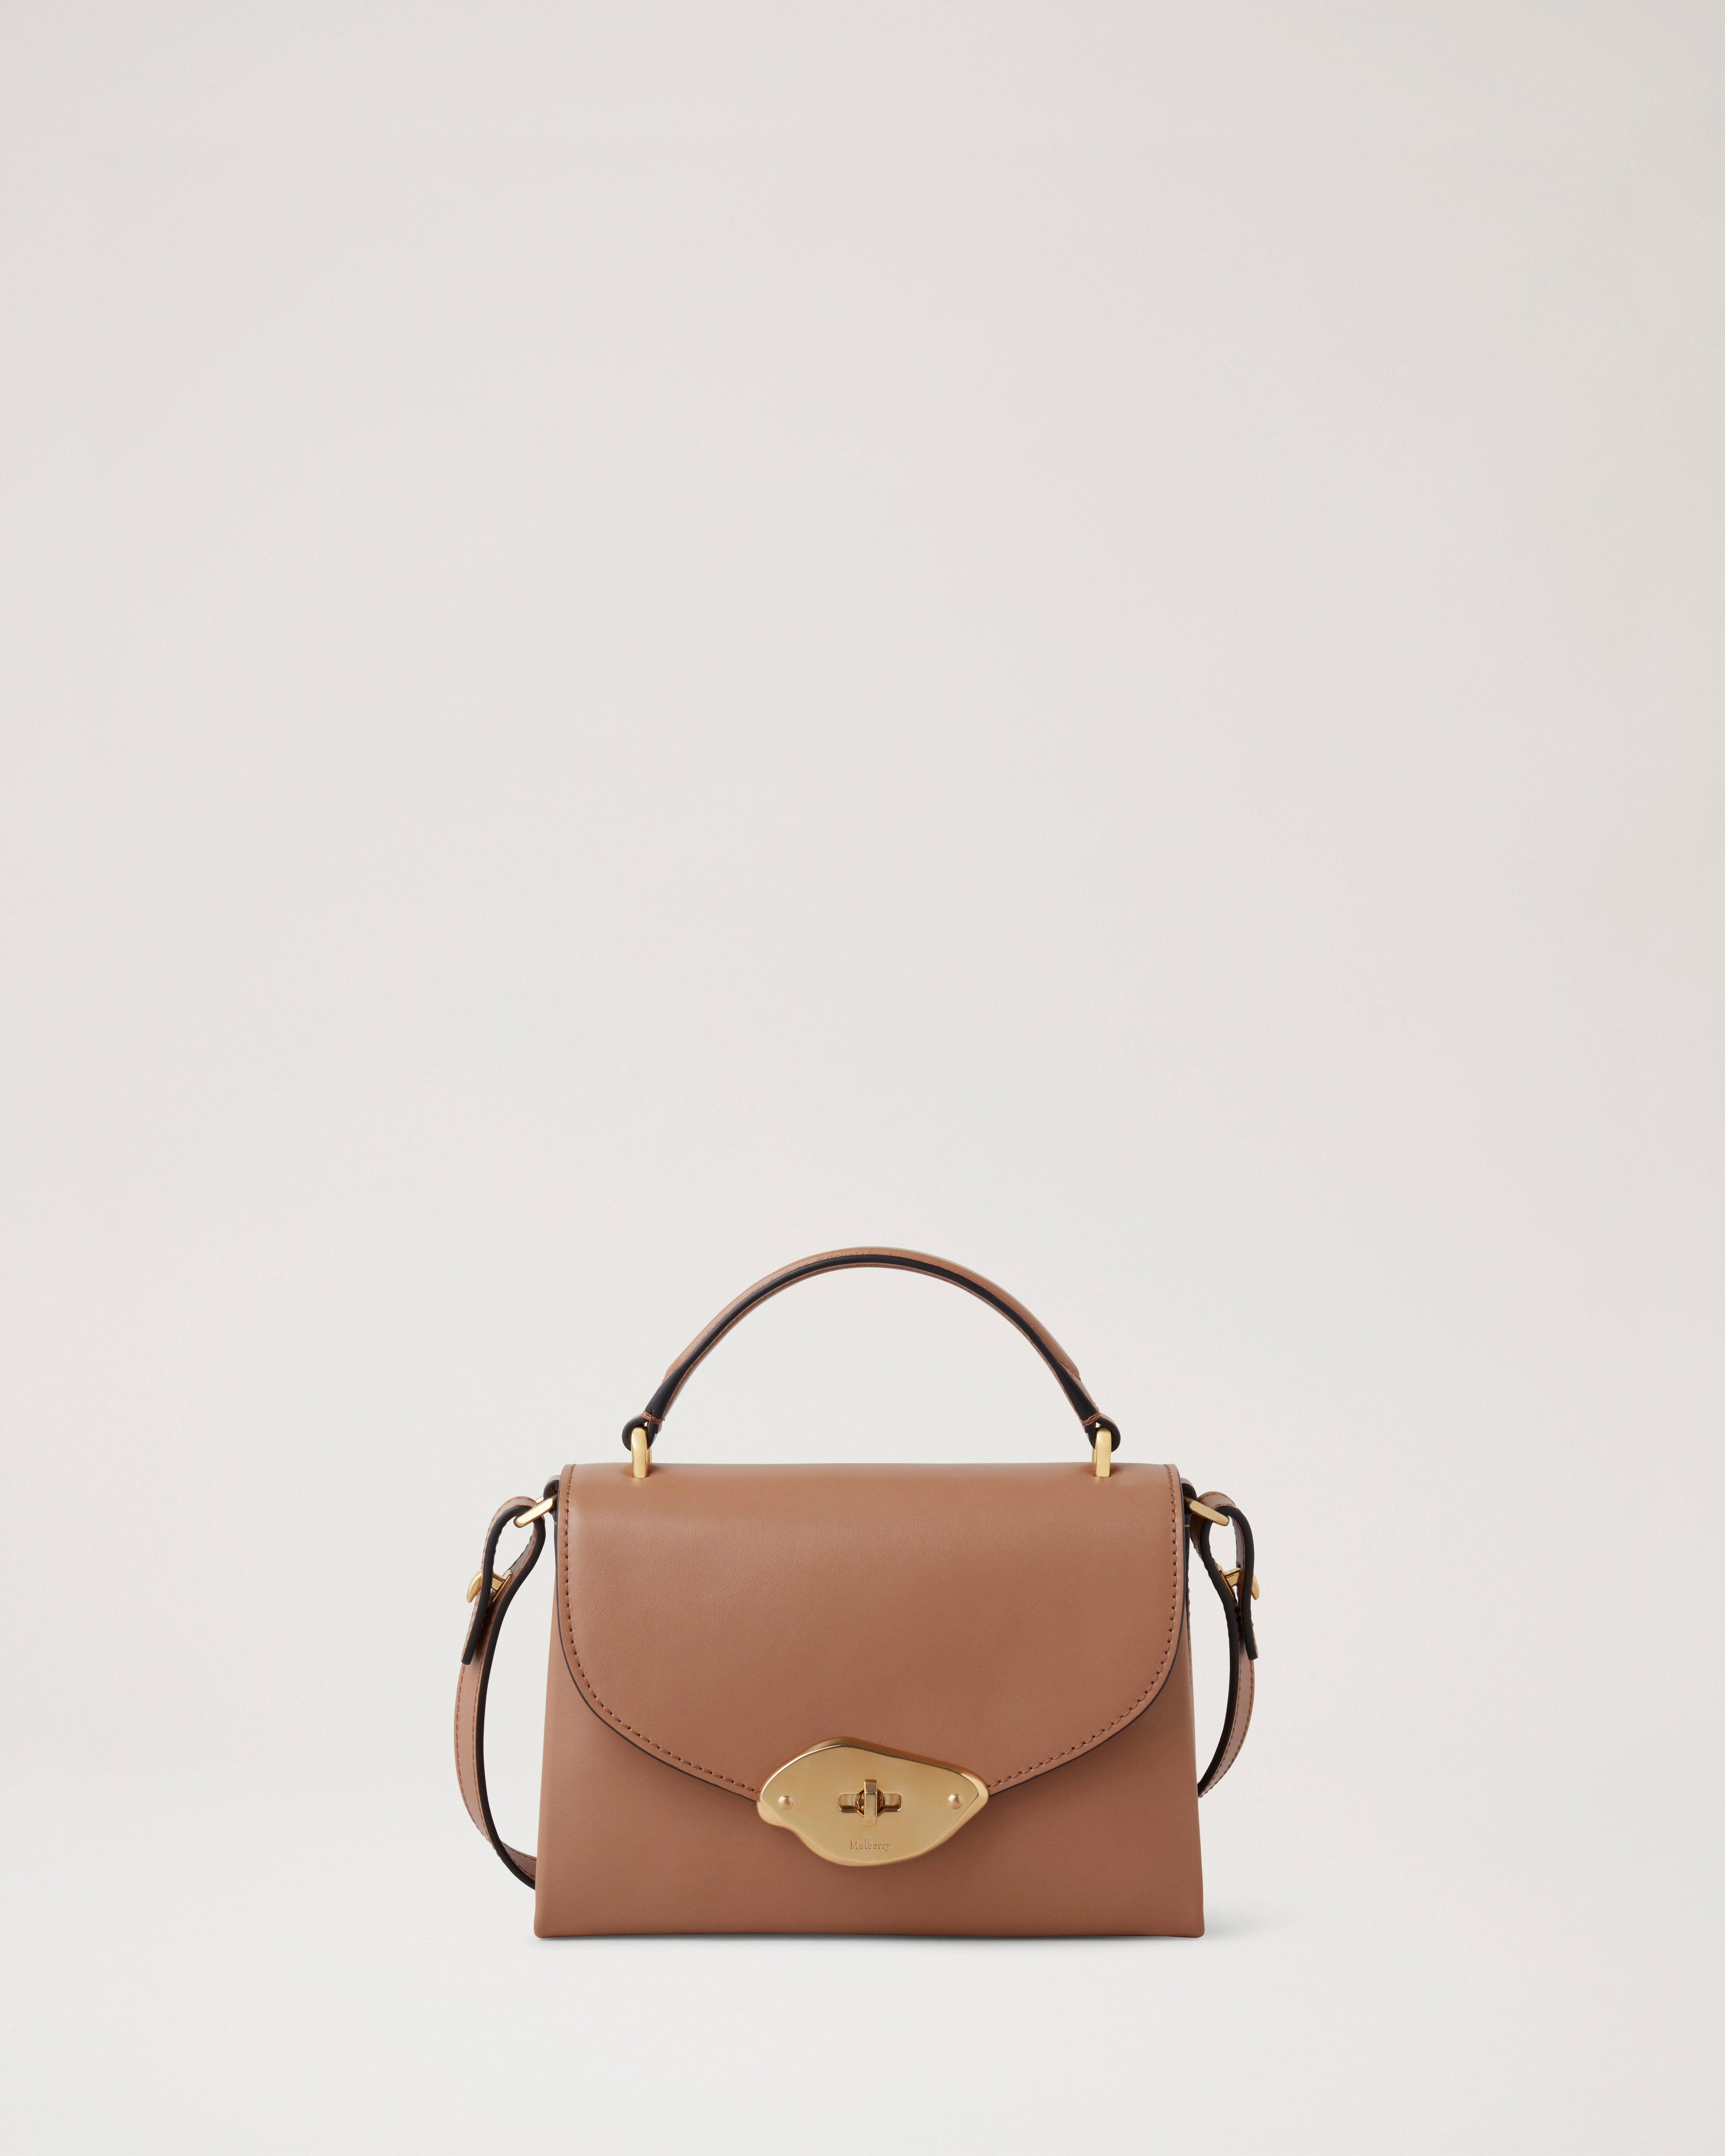 Mulberry Small Lana top handle bag in sable